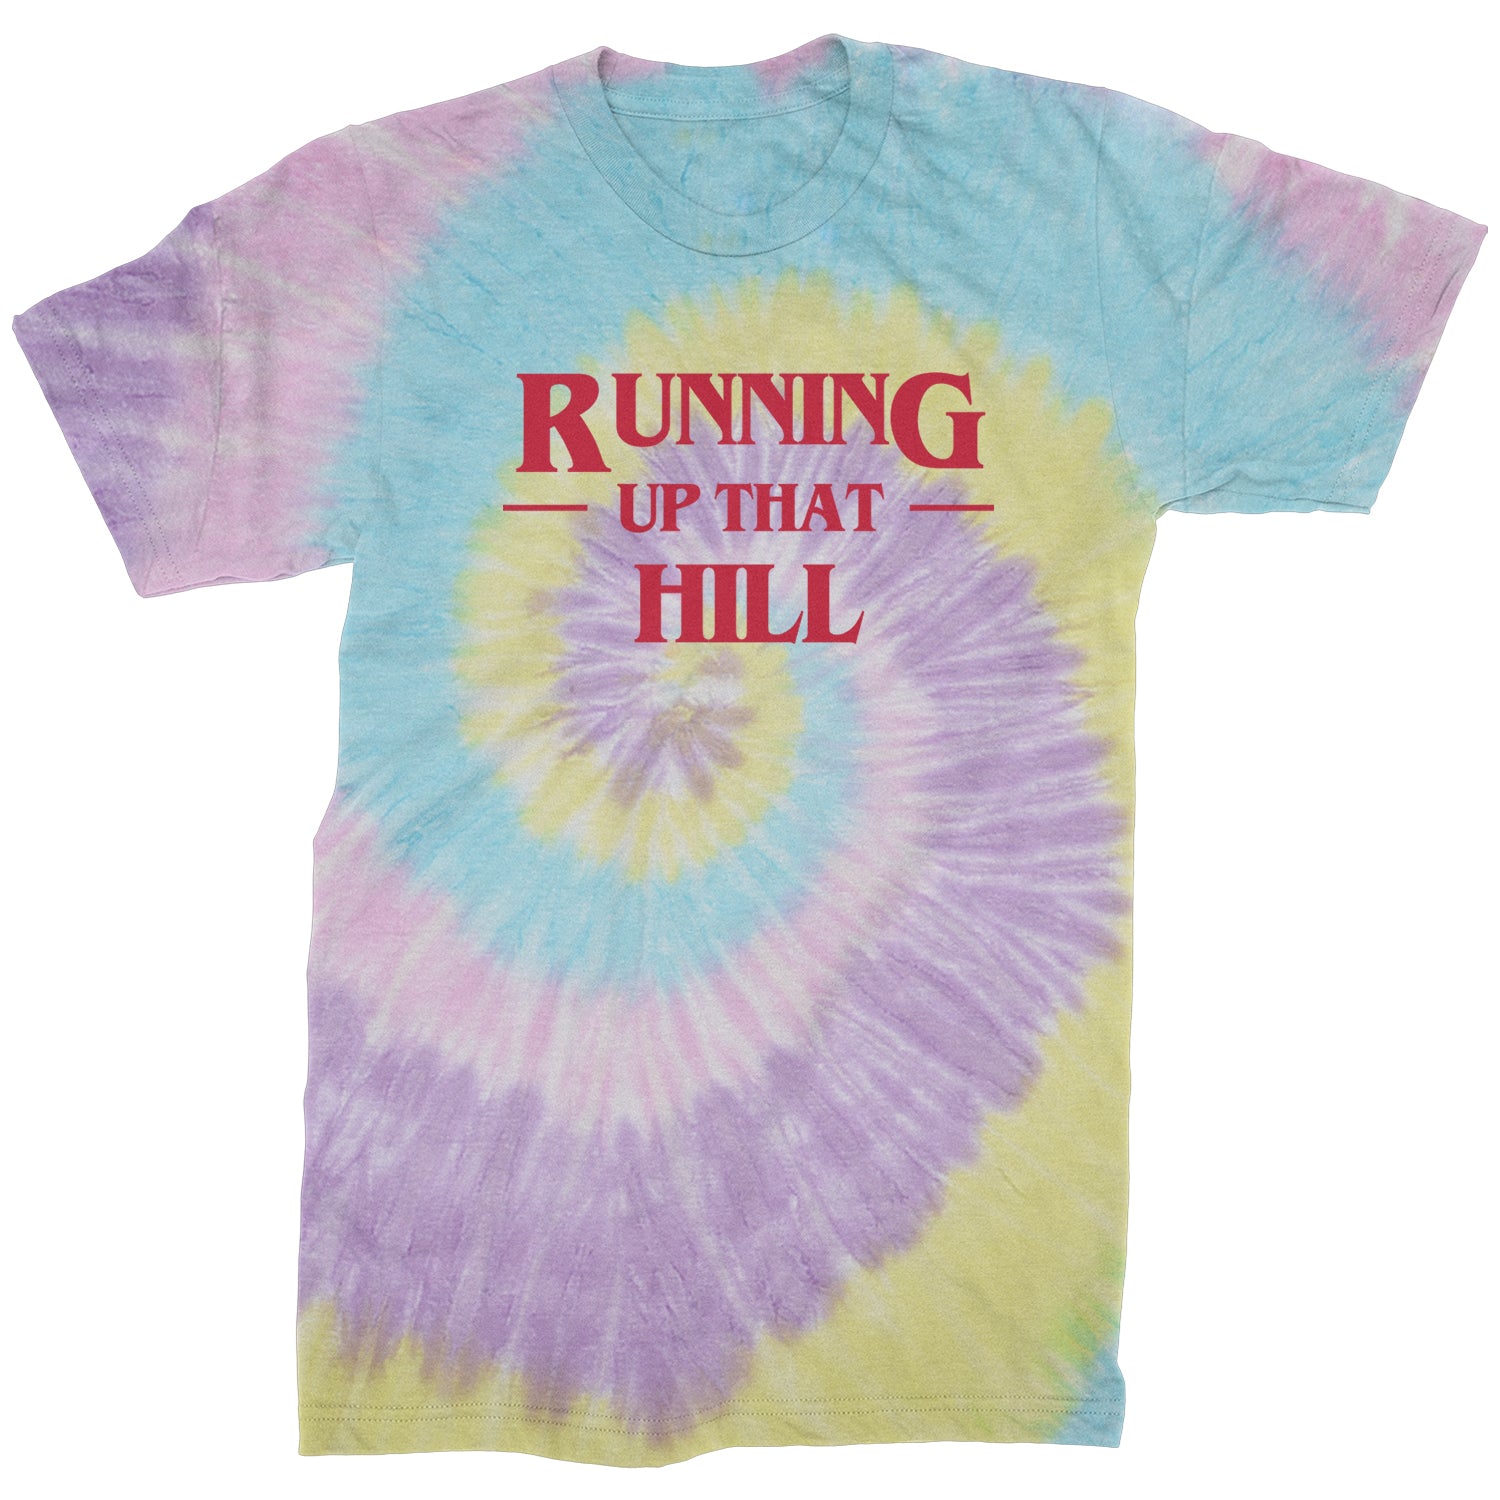 Running Up That Hill Mens T-shirt 4, don’t, eleven, four, friends, lie, season by Expression Tees